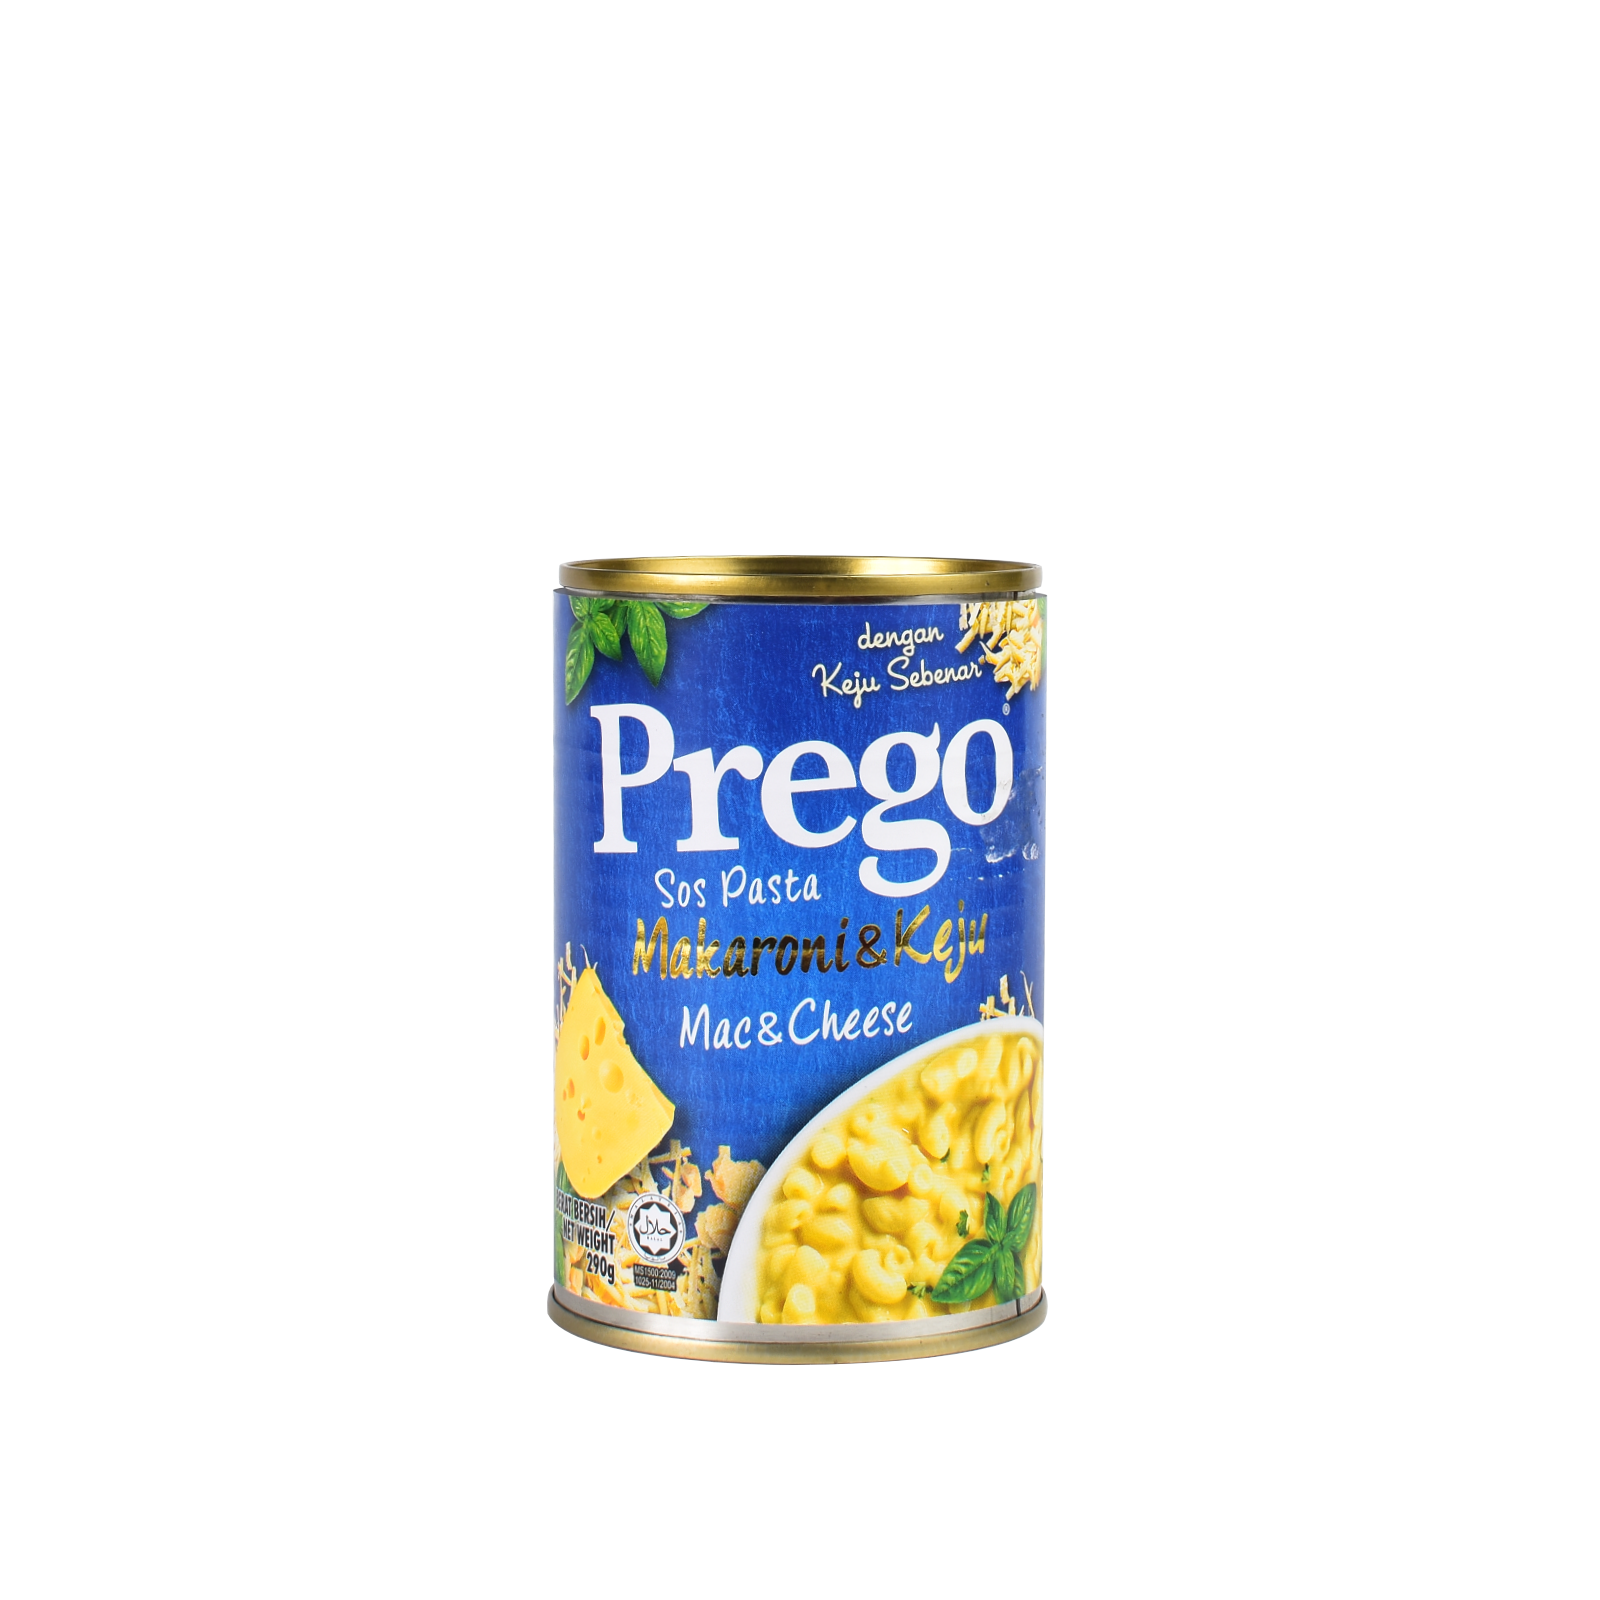 Prego Mac & Cheese Pasta Sauce 290g.png